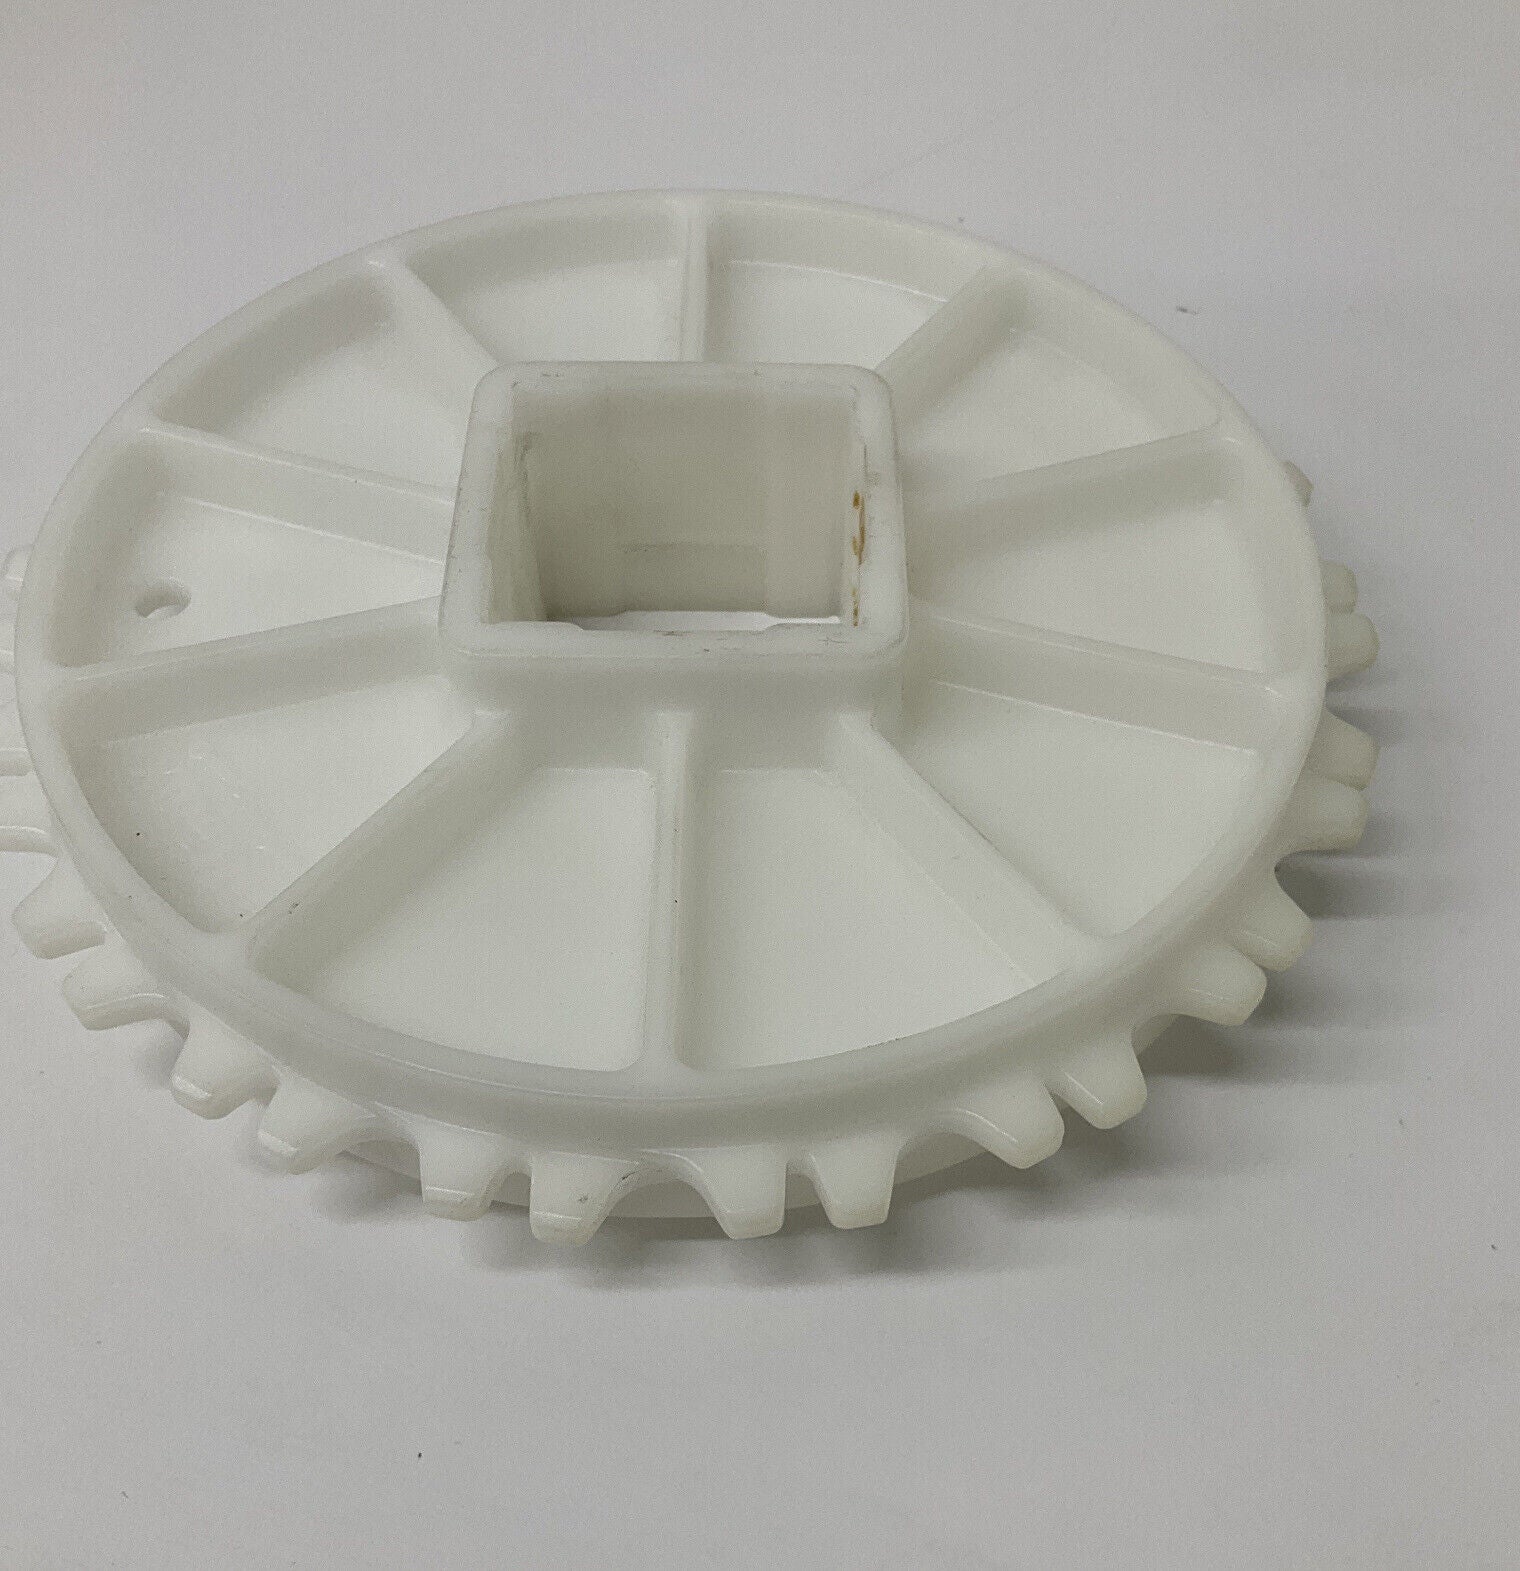 Intralox S900 Sprocket 155mm / 18 teeth 1-1/2'' square bore 6.1 PD (CL326)